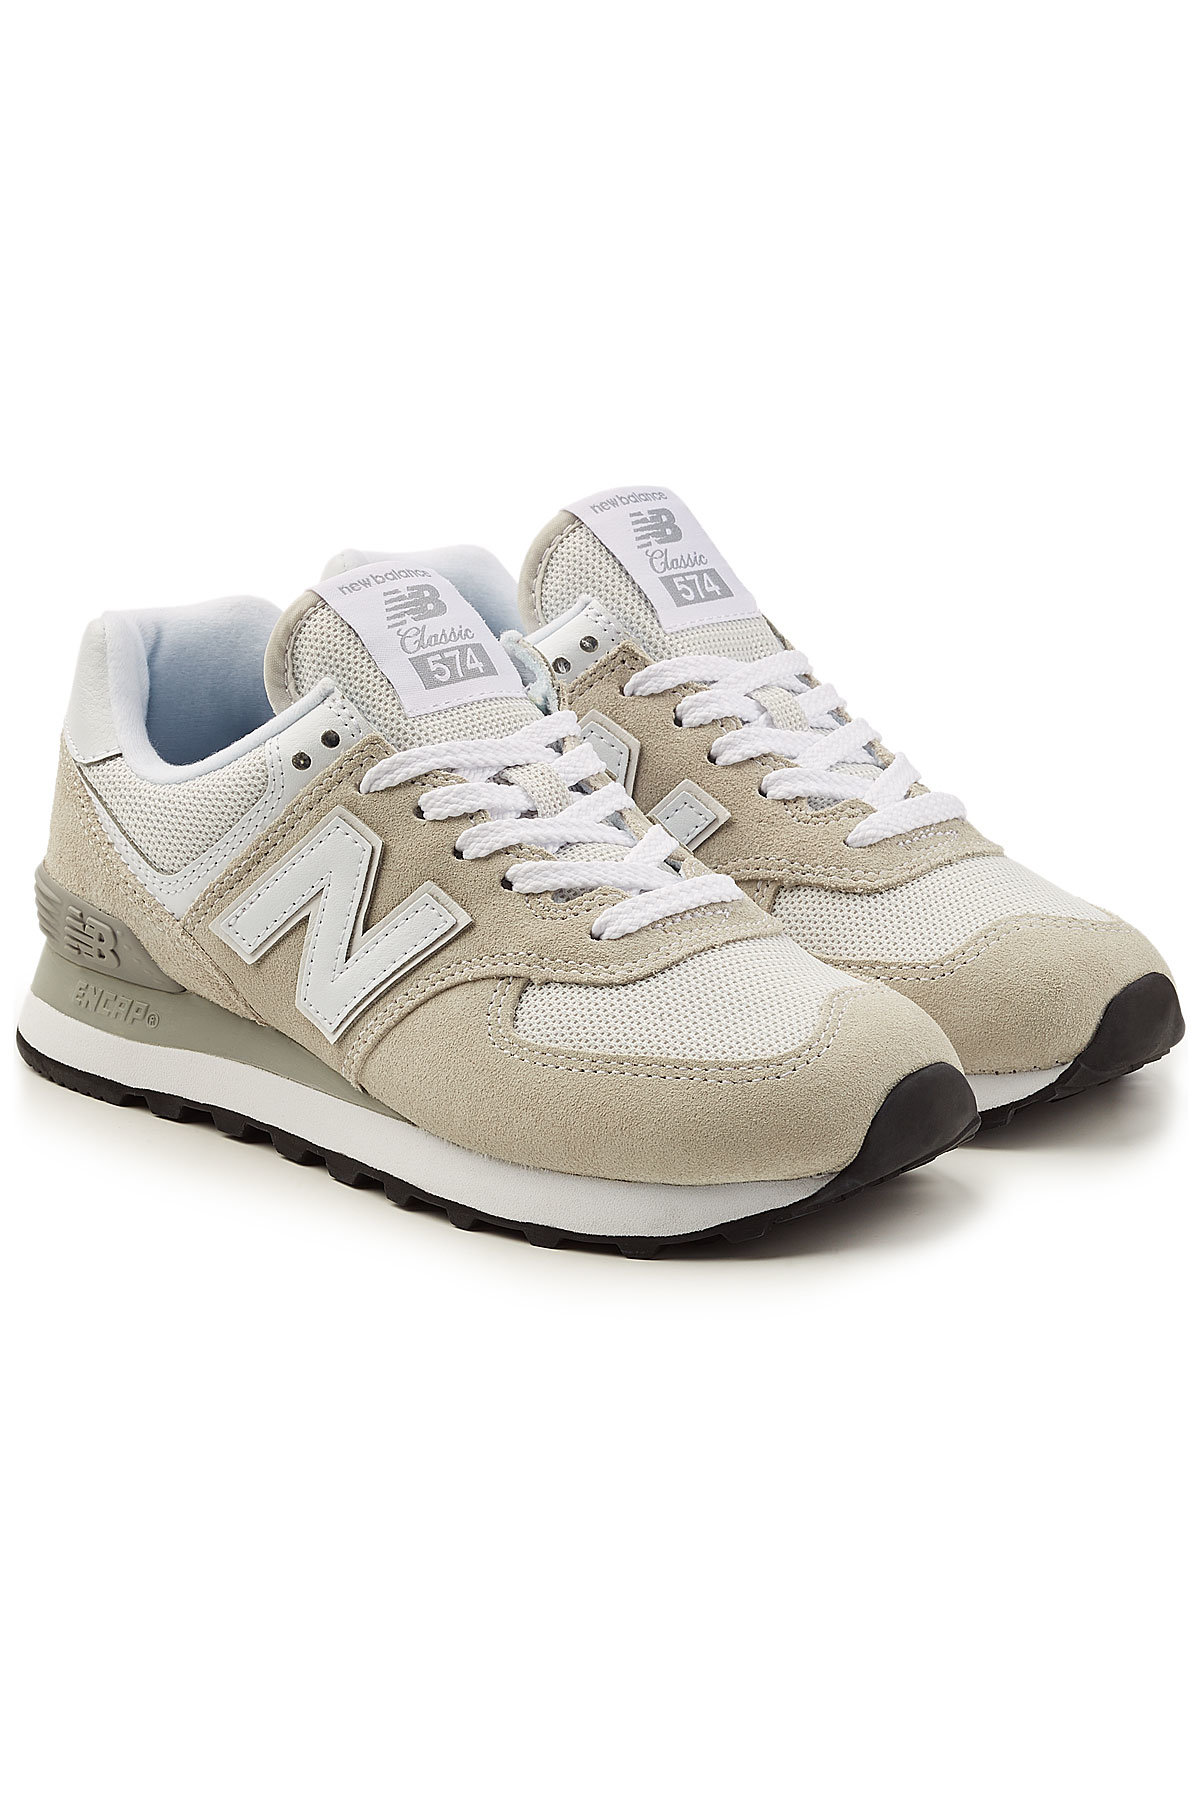 New Balance - WL574B Sneakers with Suede and Mesh